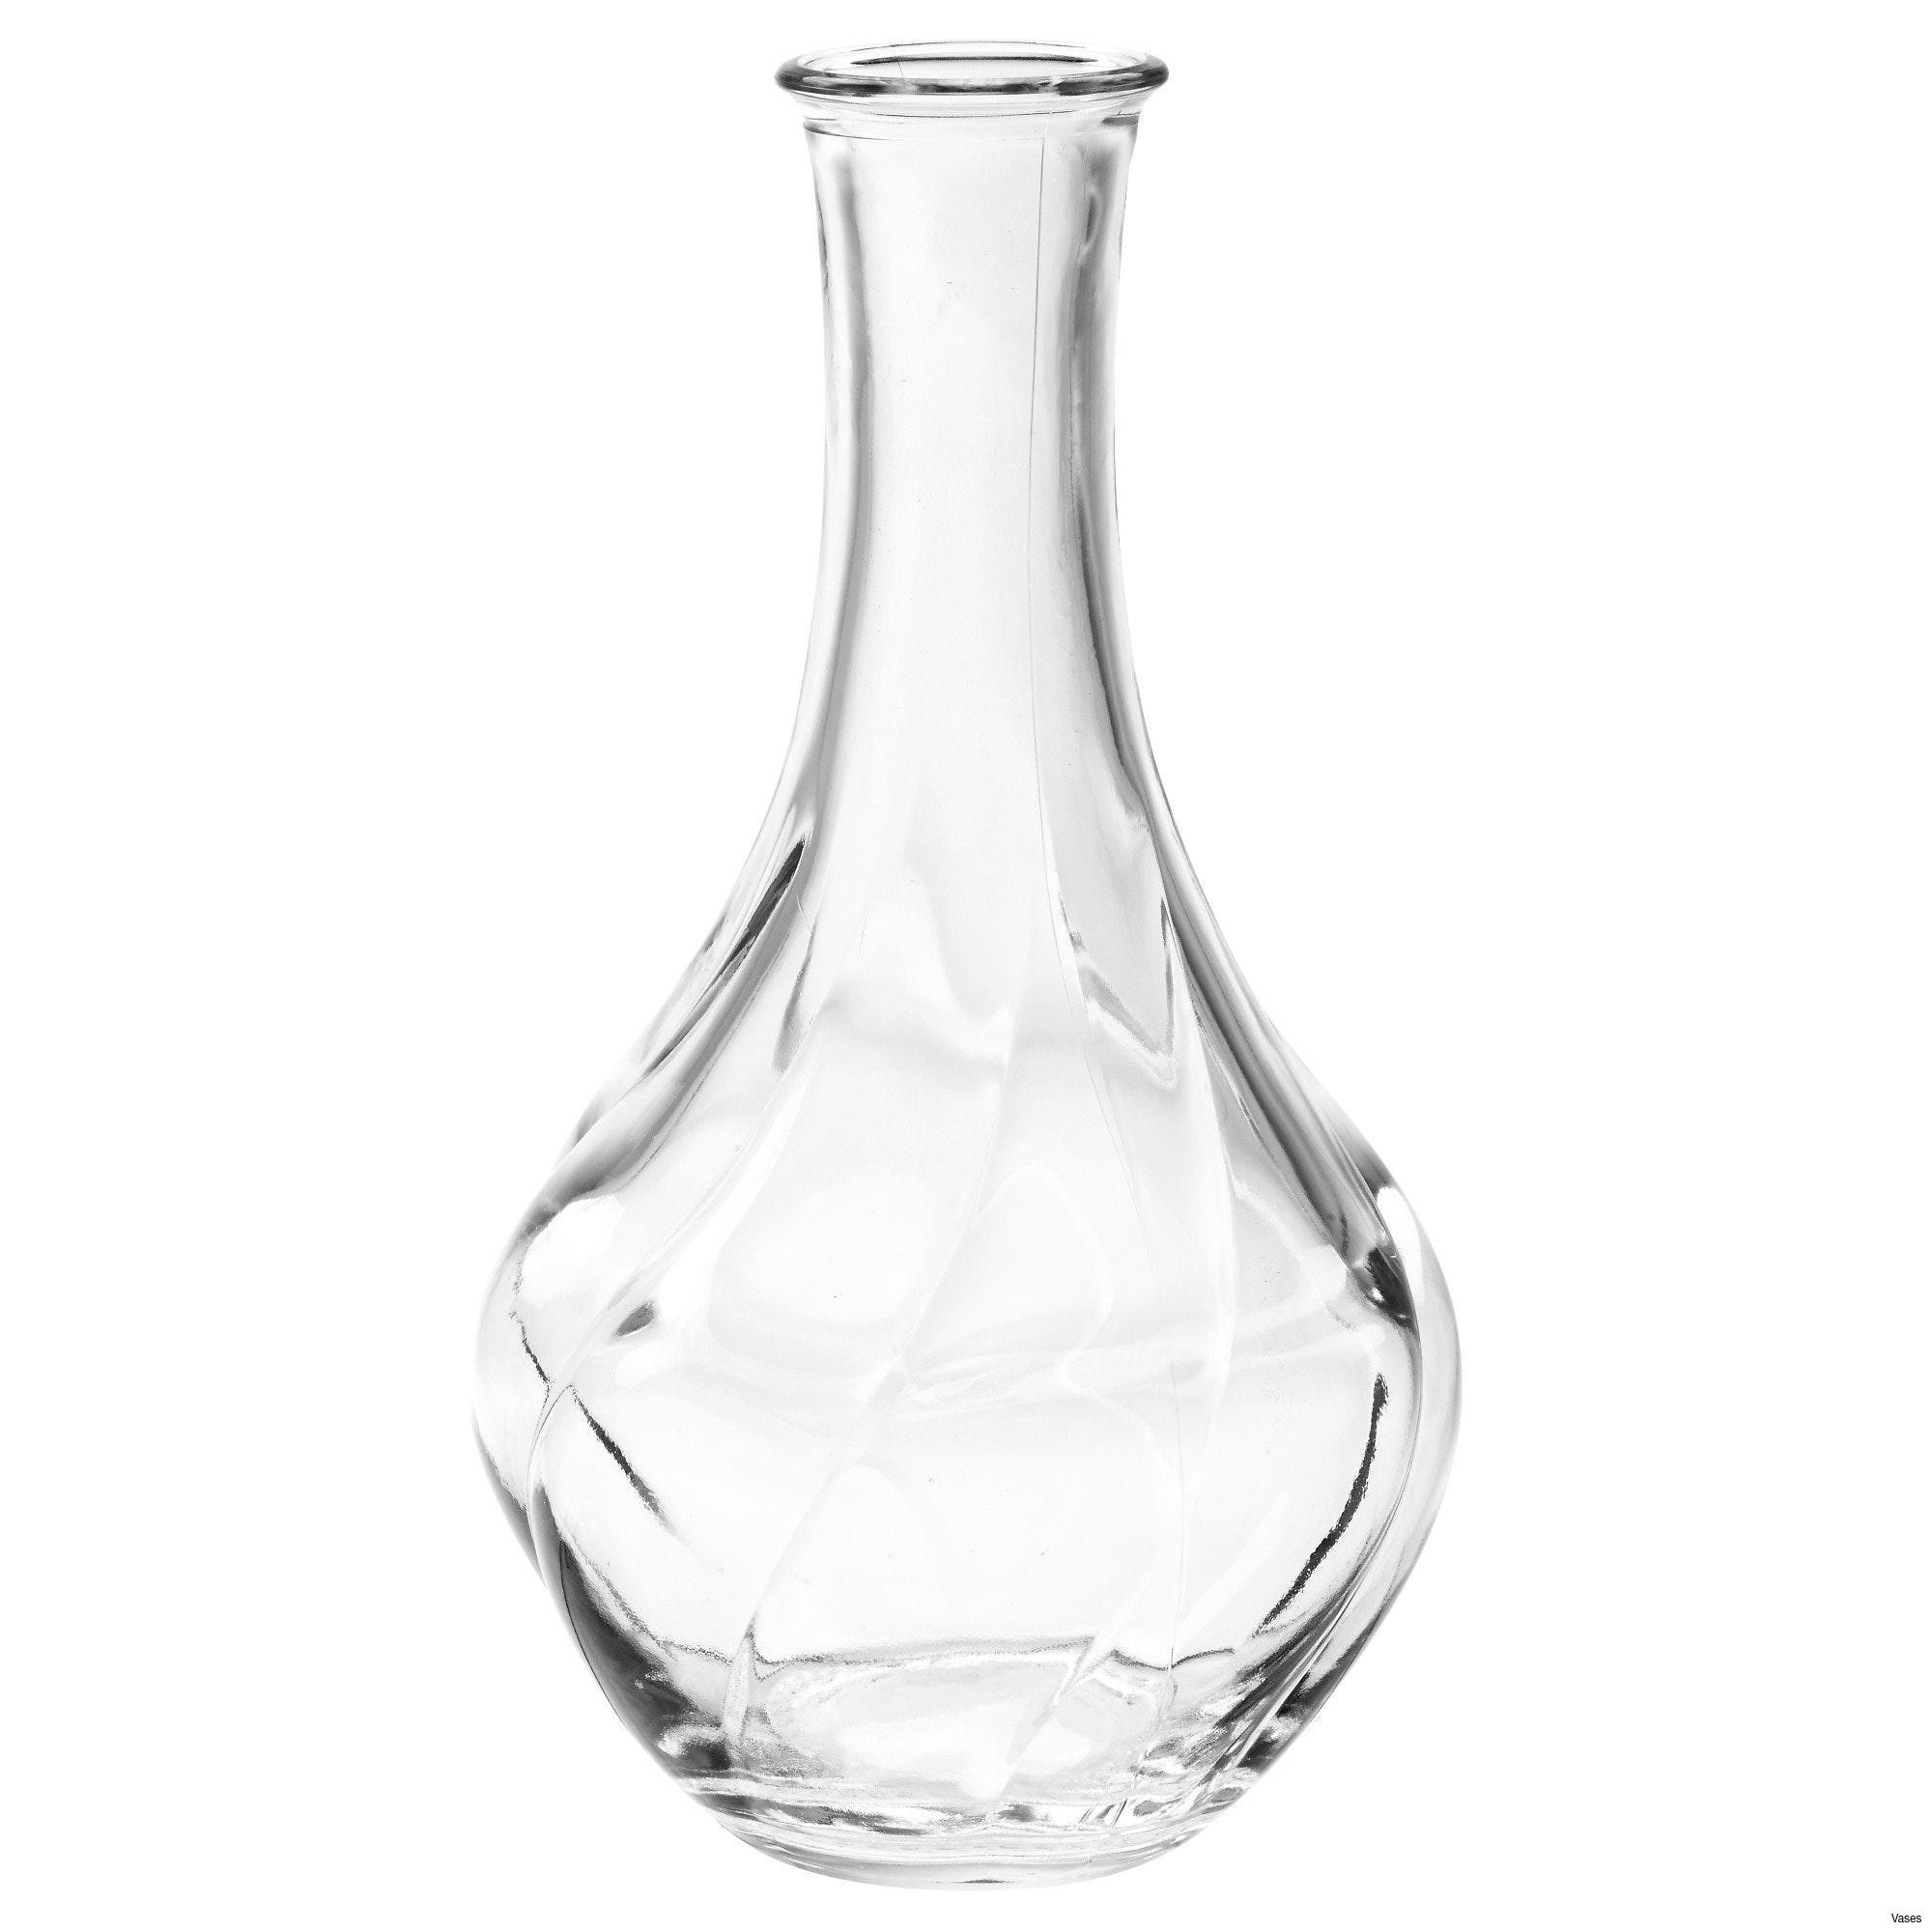 19 Fashionable Antique Waterford Crystal Vases 2023 free download antique waterford crystal vases of large crystal vase pictures living room glass vases fresh clear vase for large crystal vase pictures living room glass vases fresh clear vase 0d tags amazi